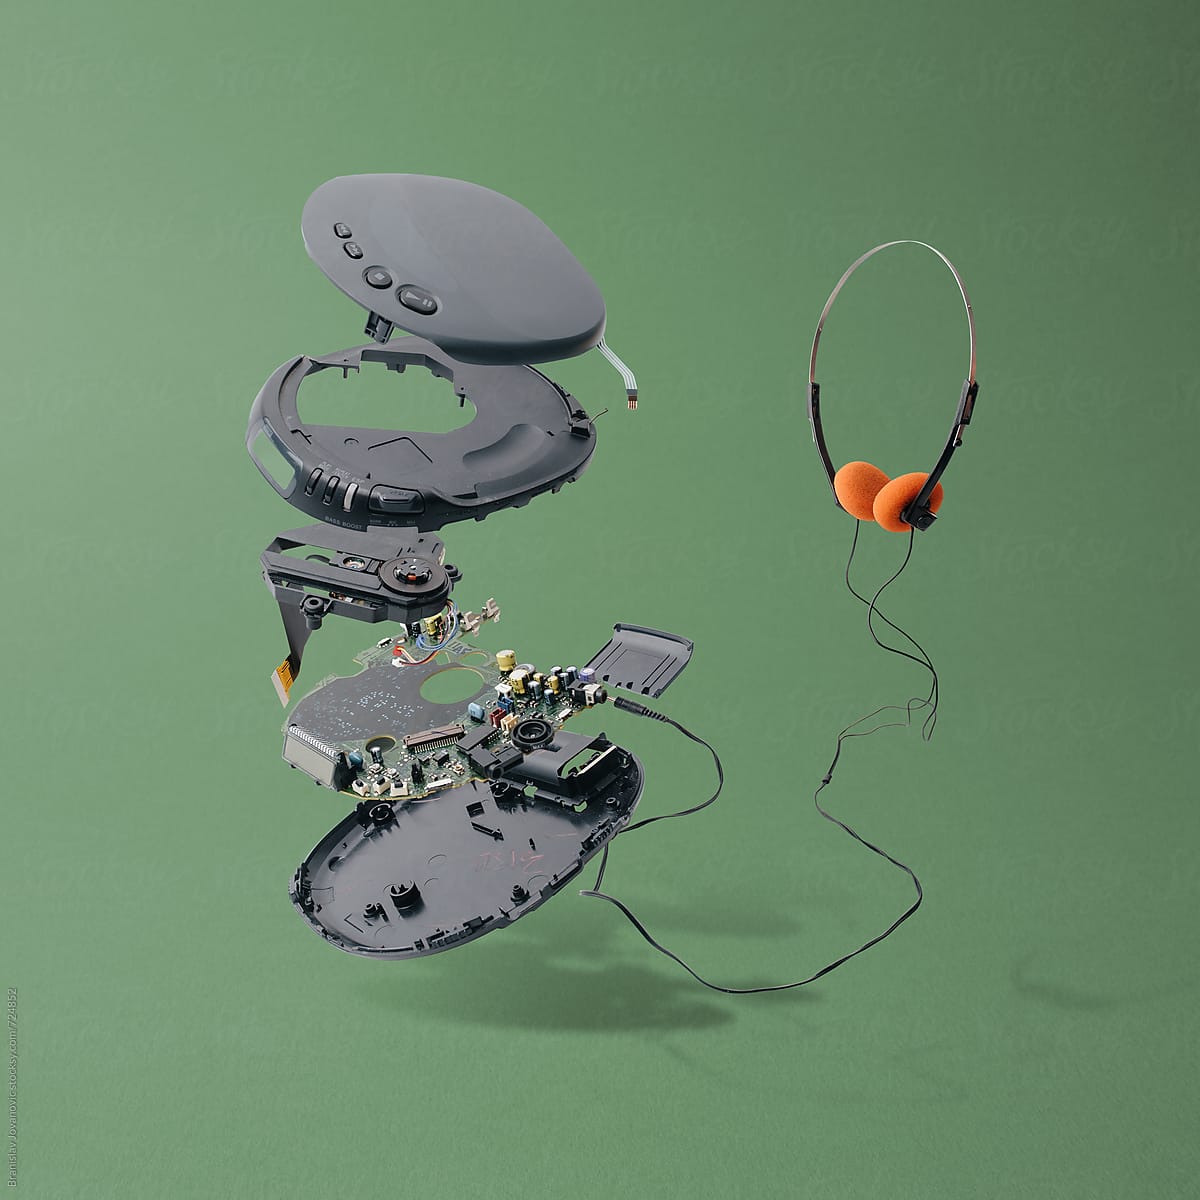 Disassembled Portable CD Player With Headphones On Green Background